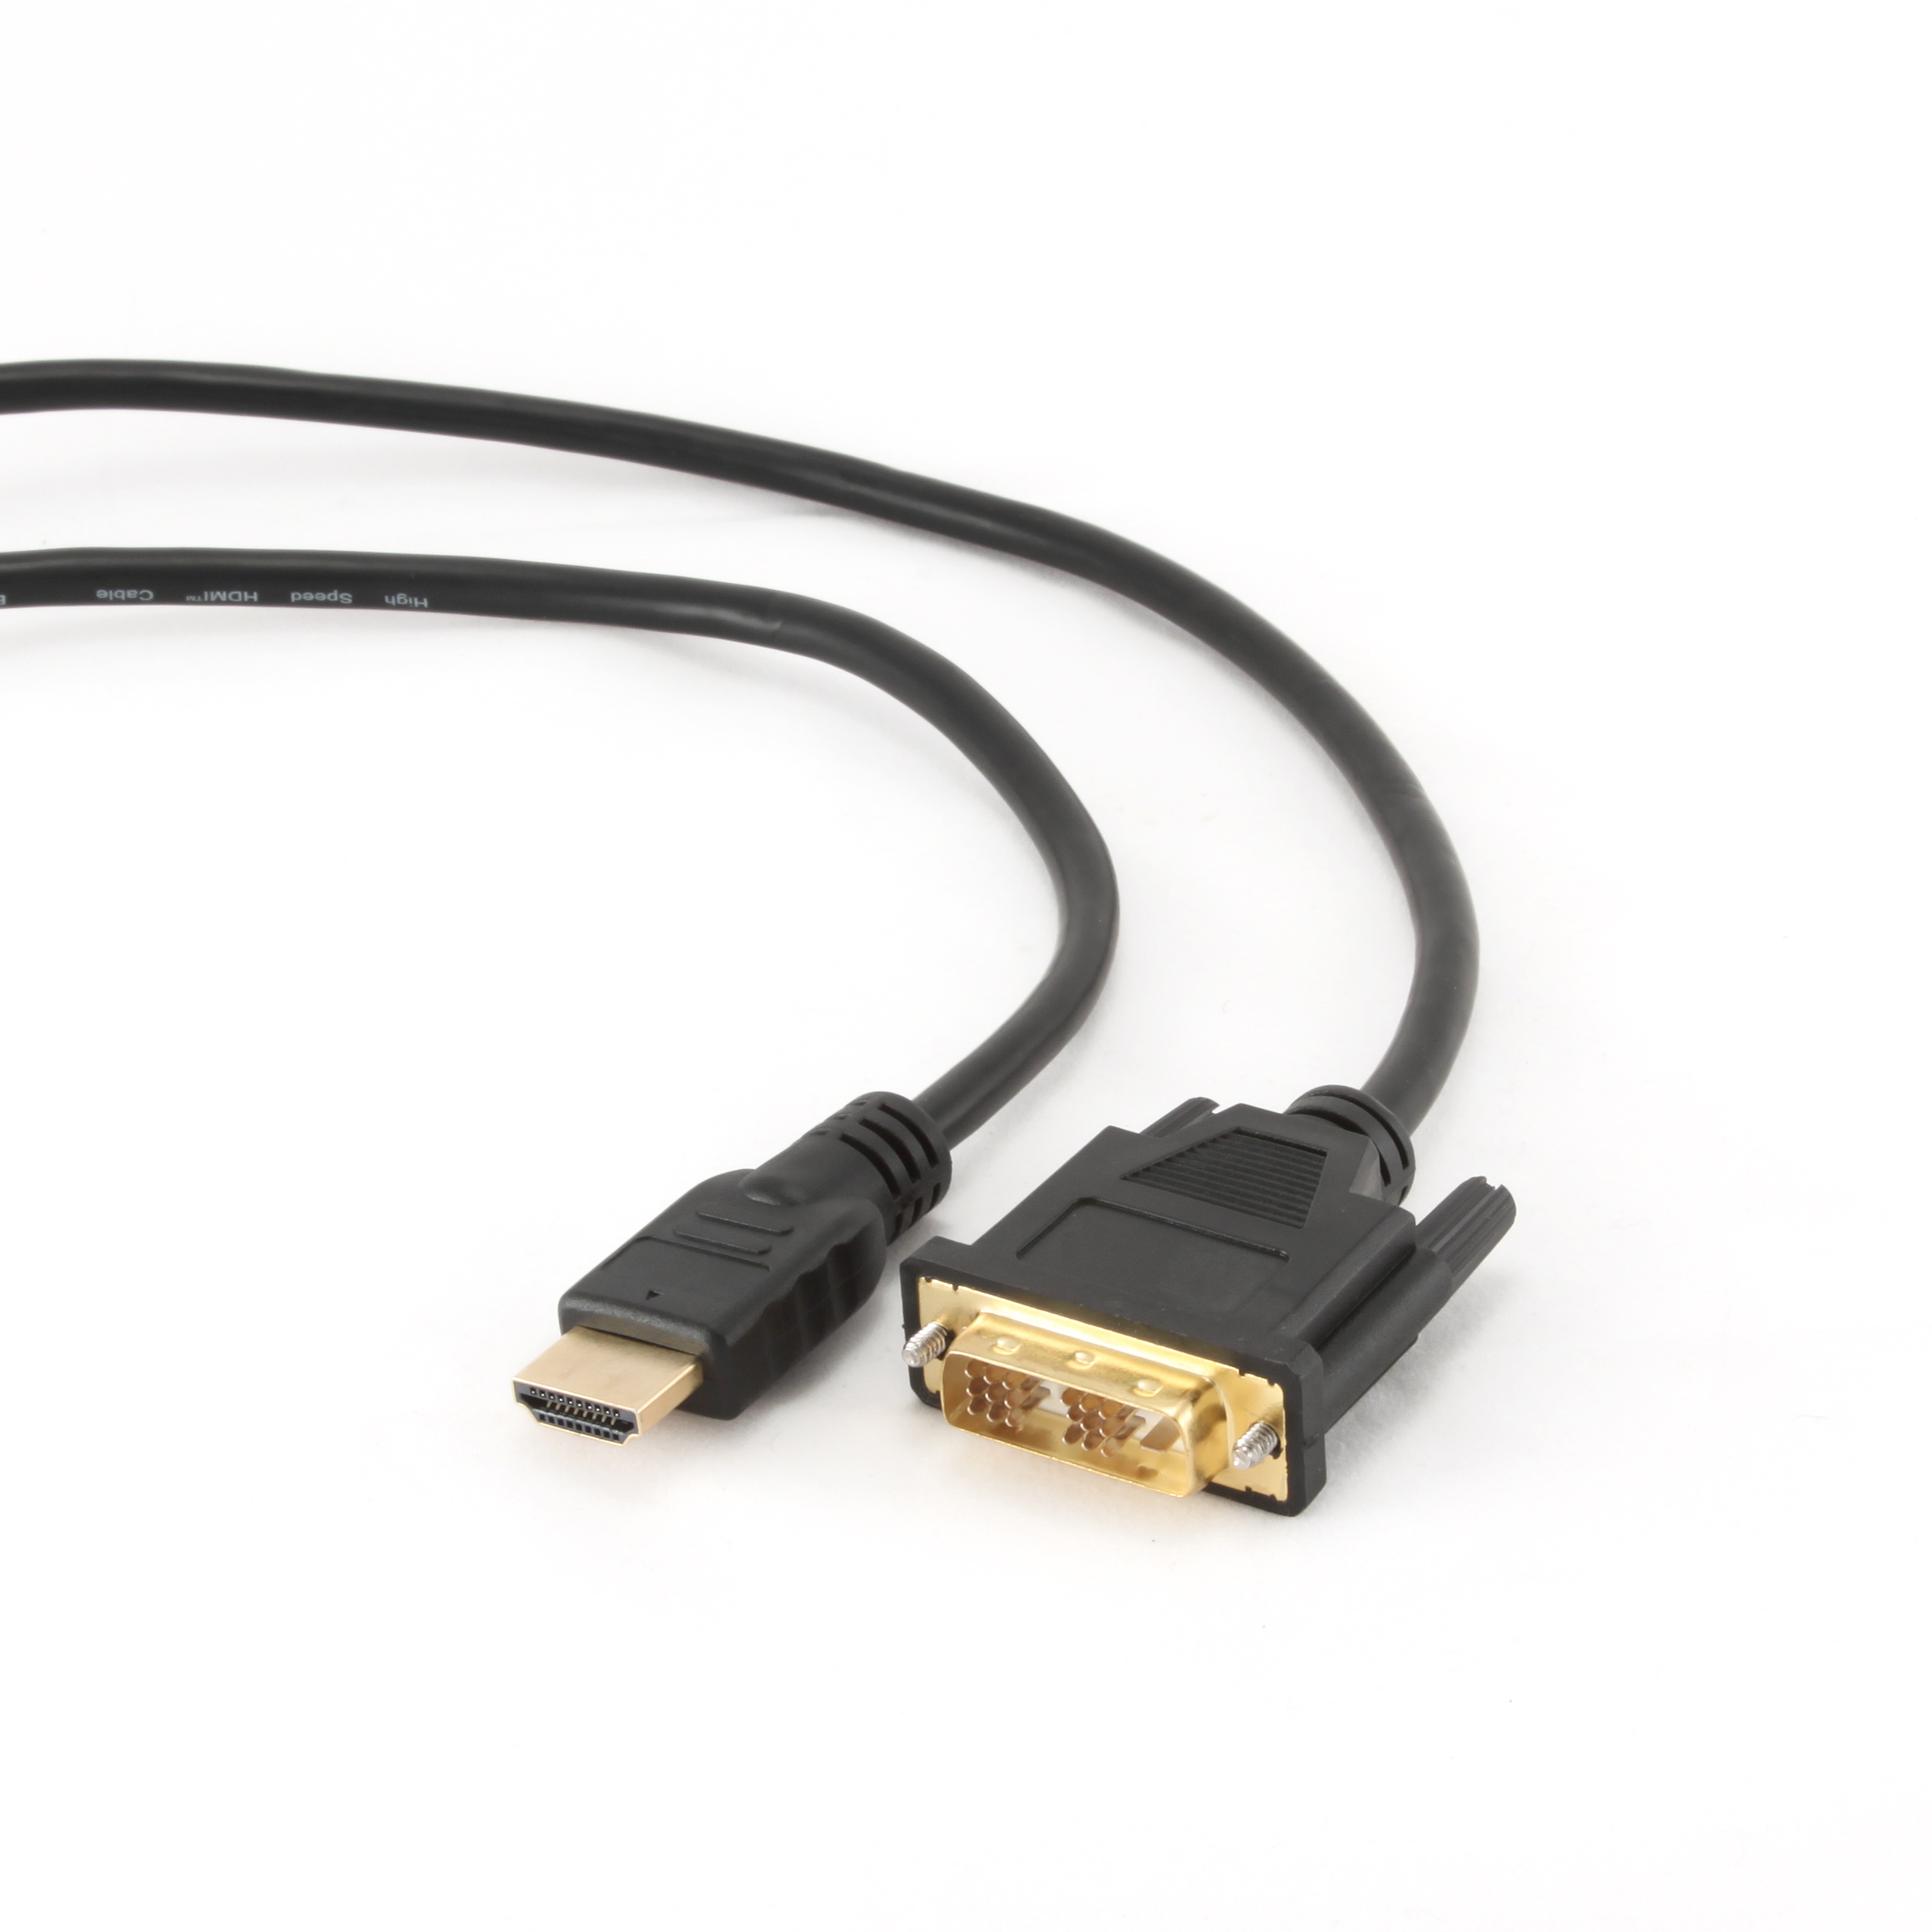 GEMBIRD 1.8m HDMI to DVI Cable 